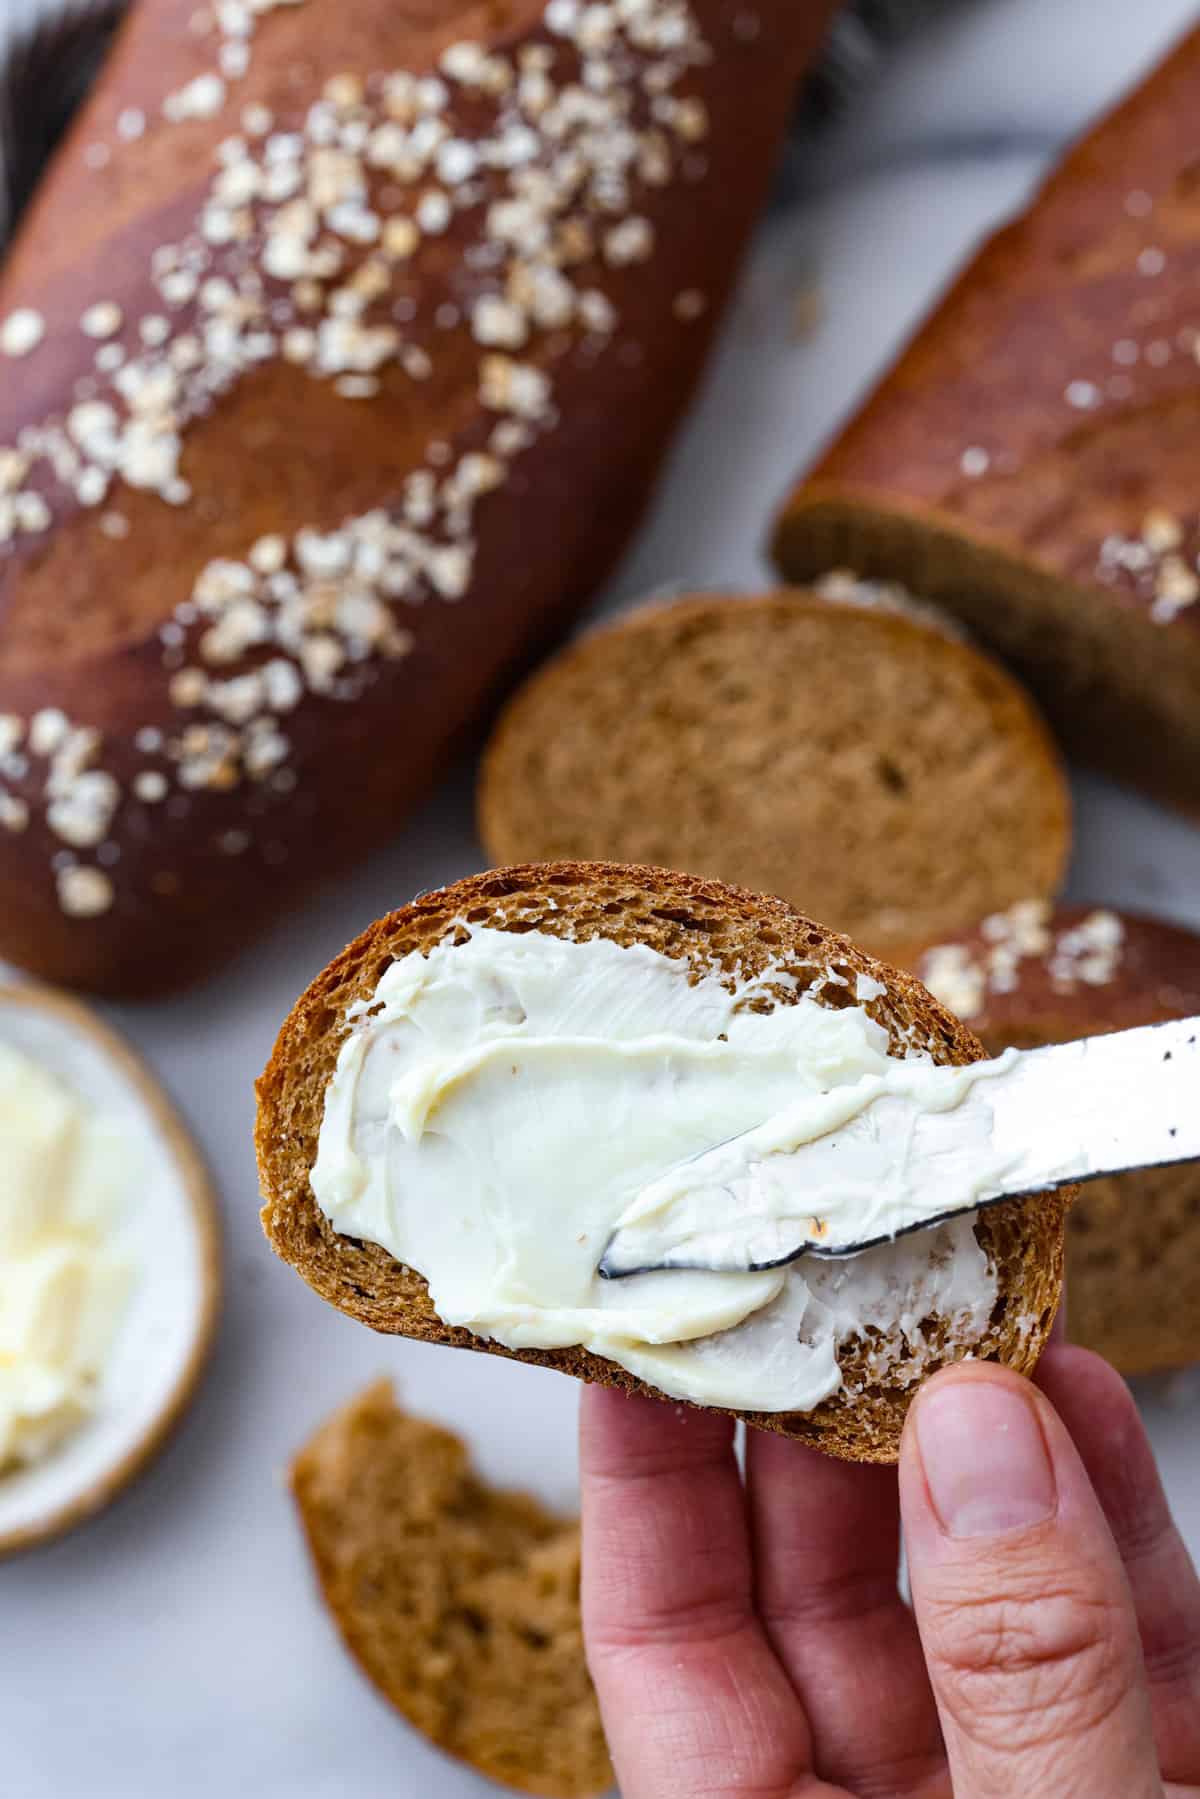 Close view of butter being spread onto a slice of brown bread.